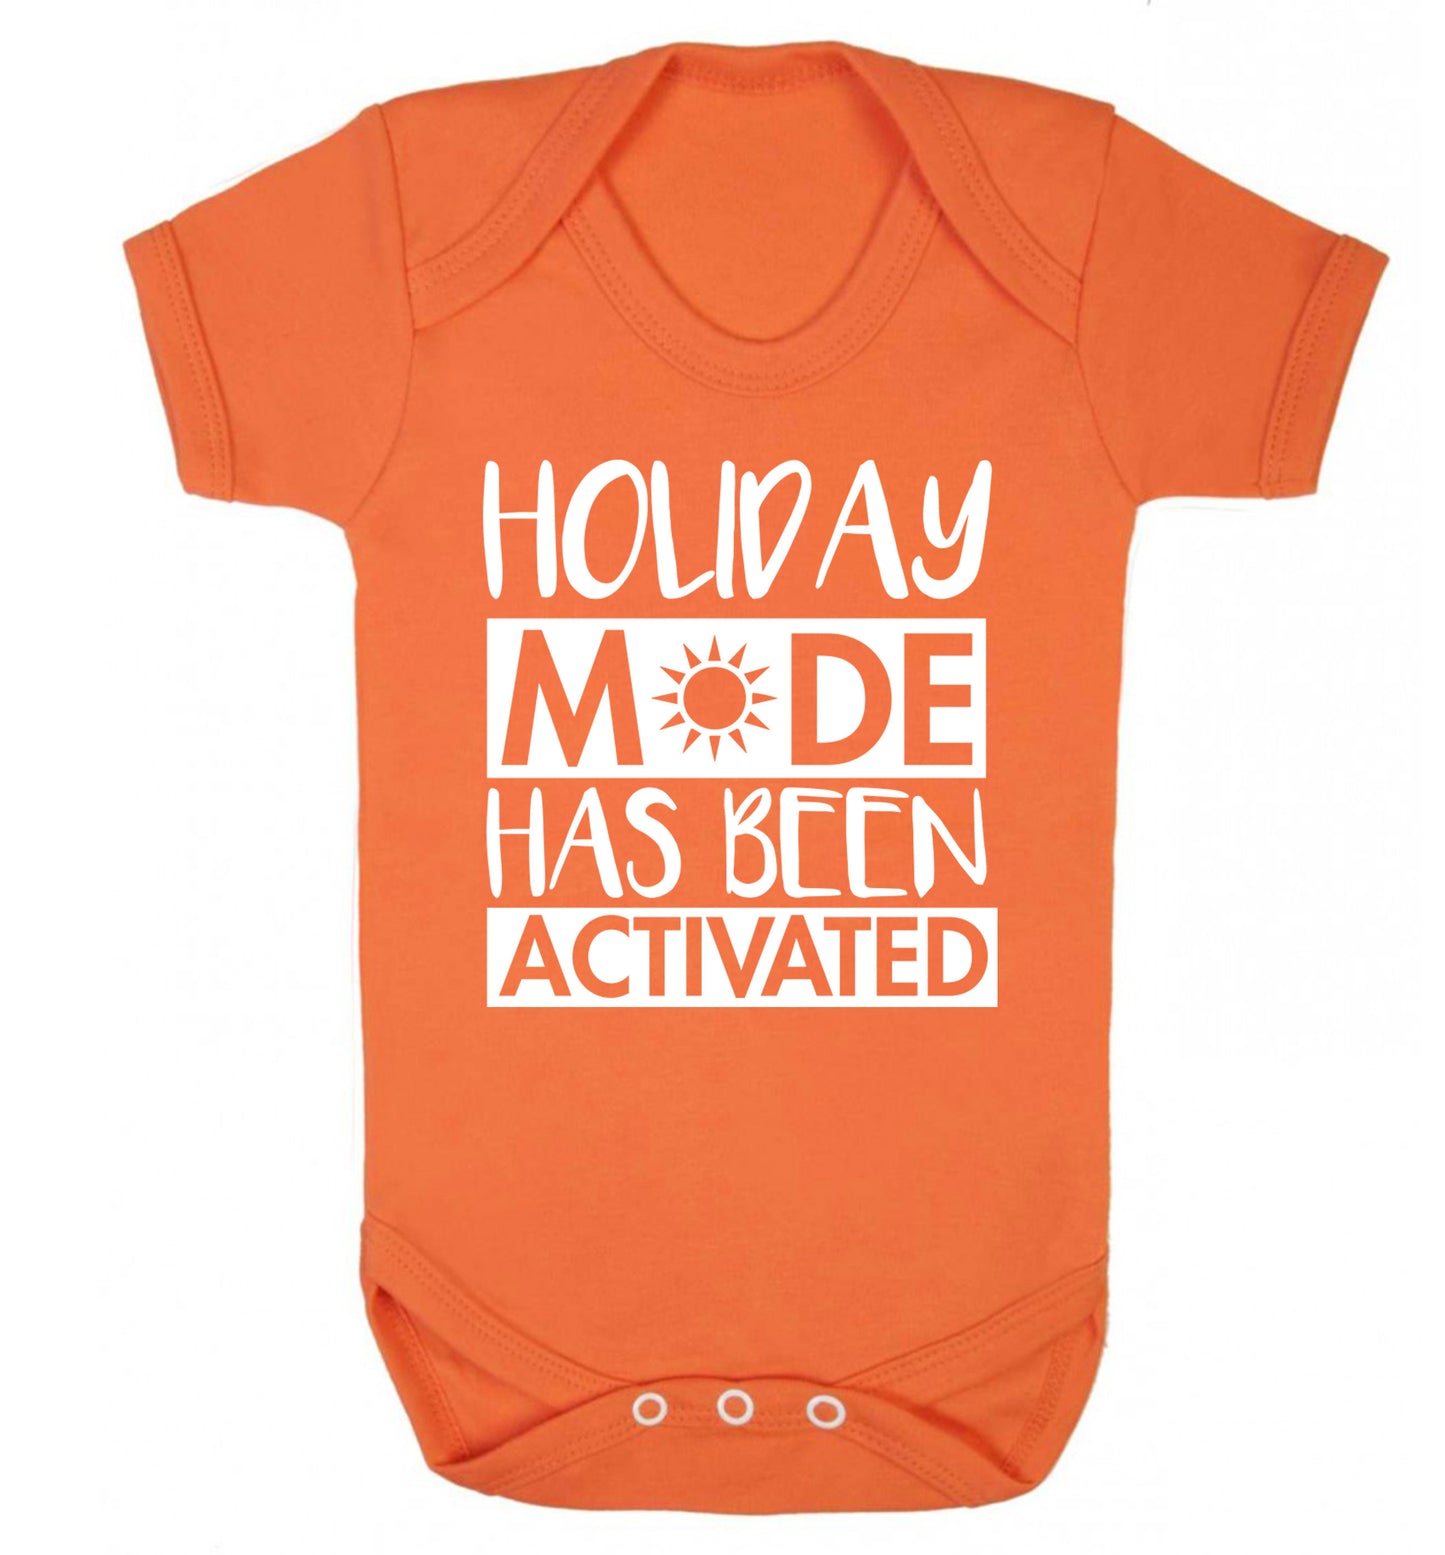 Holiday mode has been activated Baby Vest orange 18-24 months